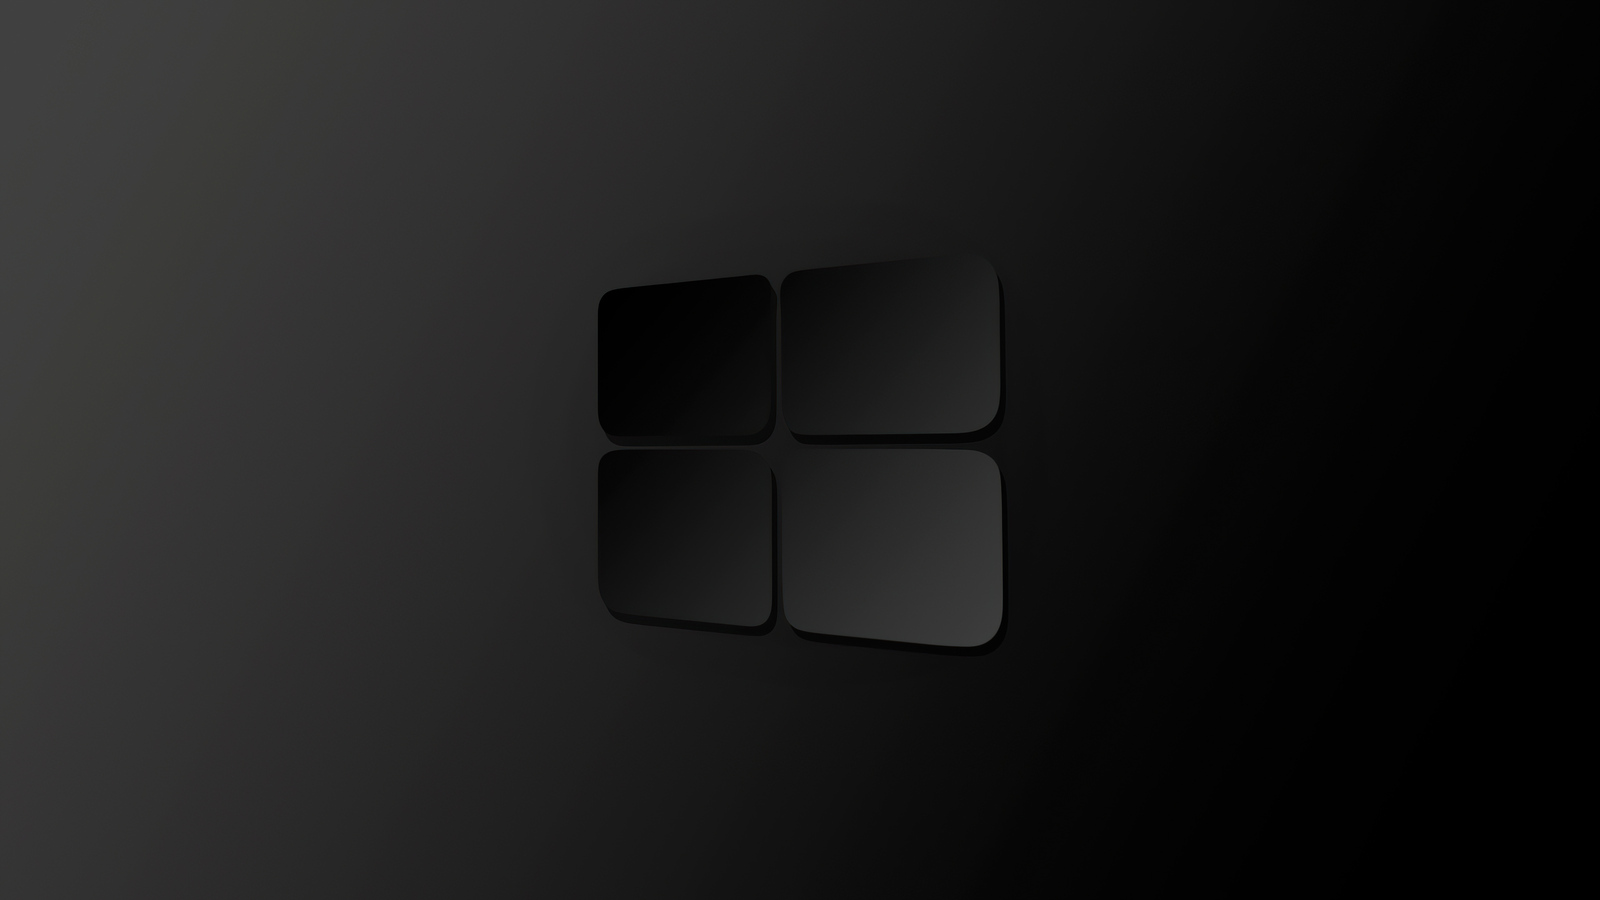 1600x900 Windows 10 Darkness Logo 4k 1600x900 Resolution HD 4k Wallpapers,  Images, Backgrounds, Photos and Pictures